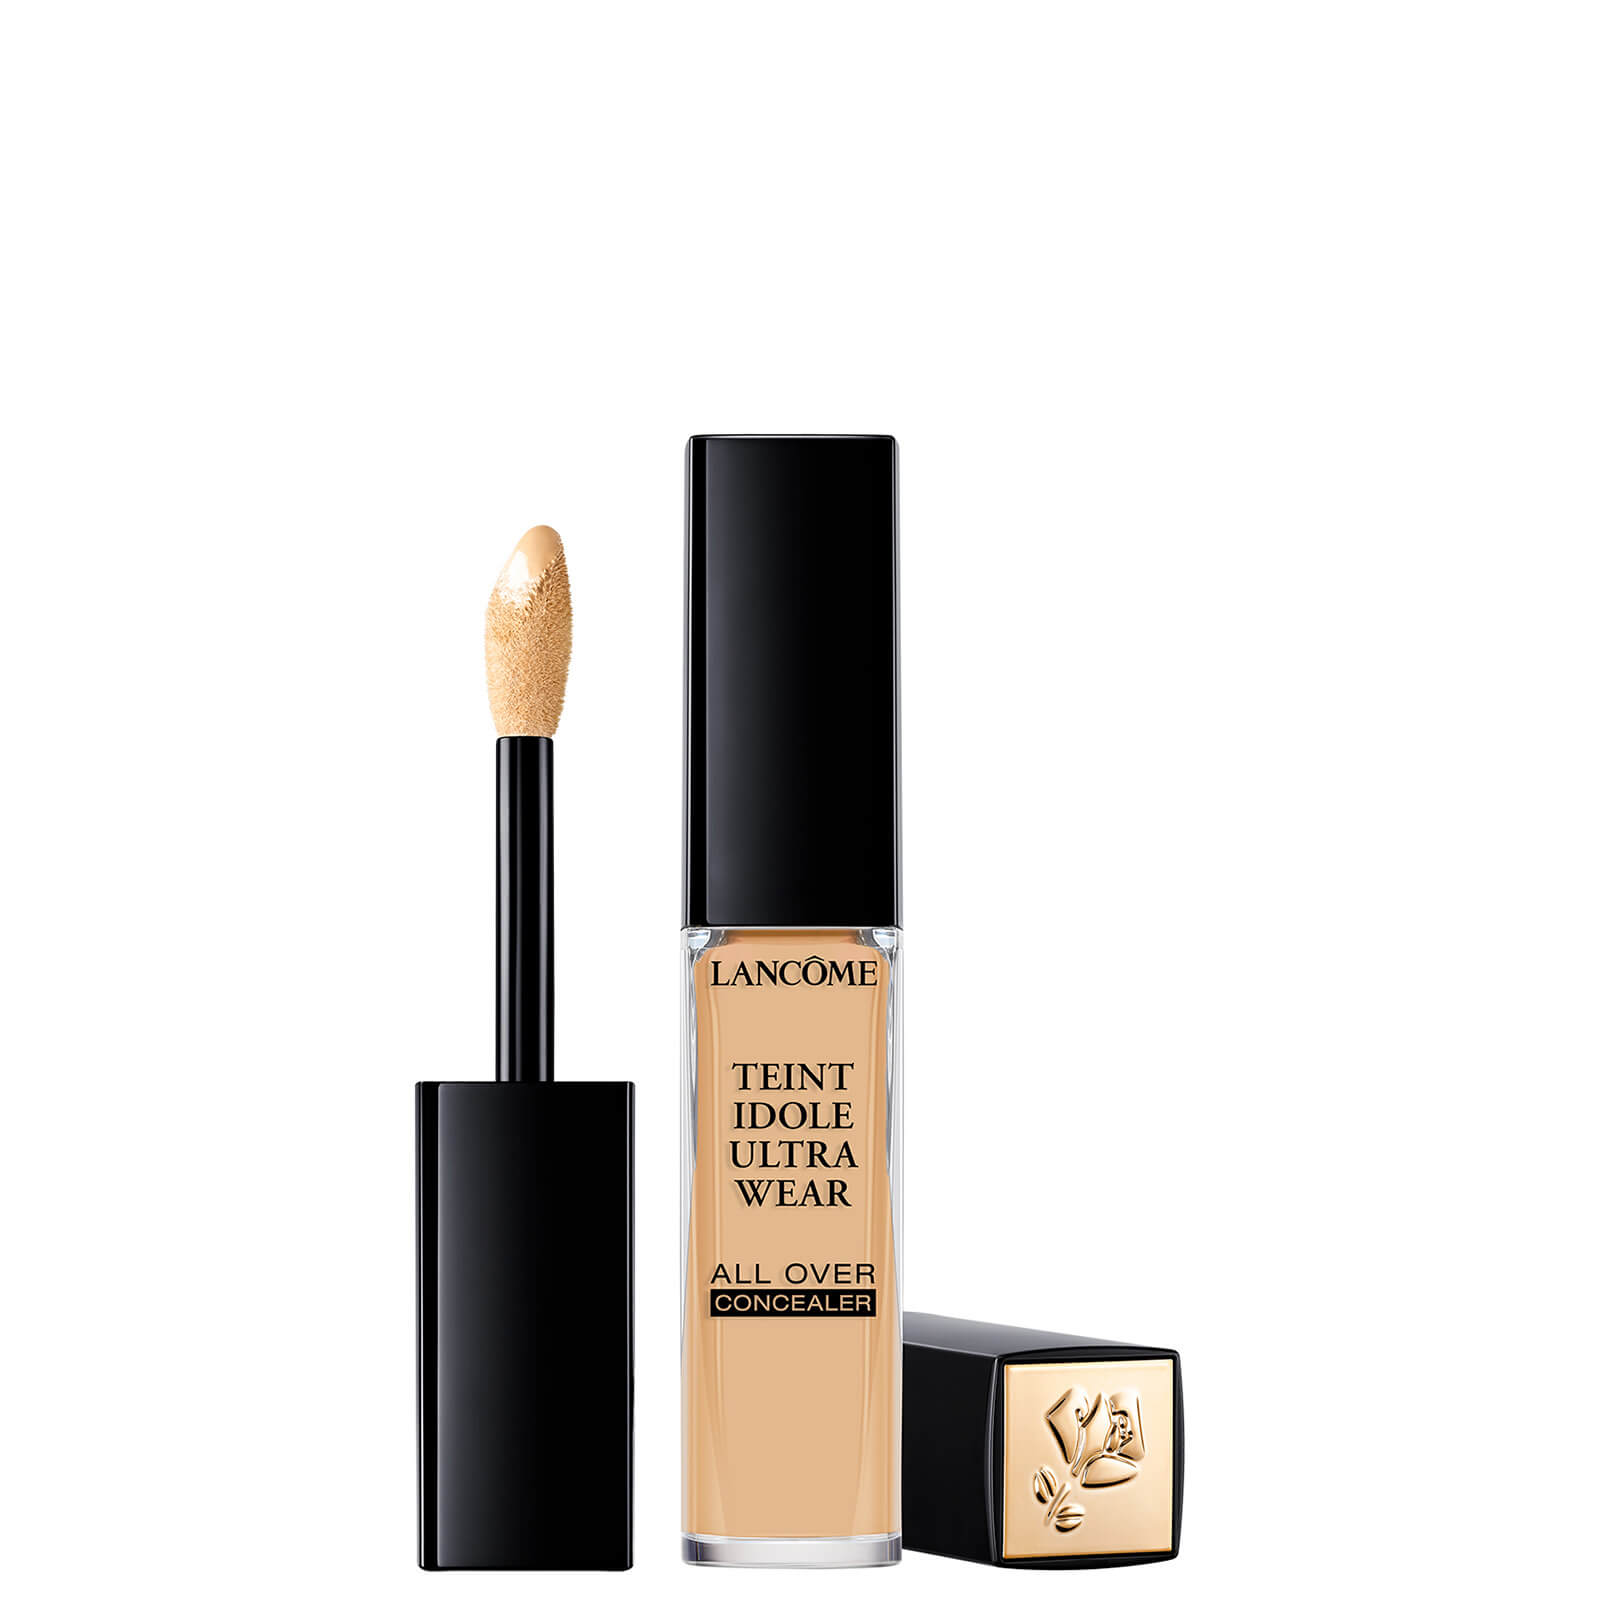 Image of Concealer Teint Idole Ultra Wear All Over Lancôme 13ml (varie tonalità) - 320 Bisque W 035